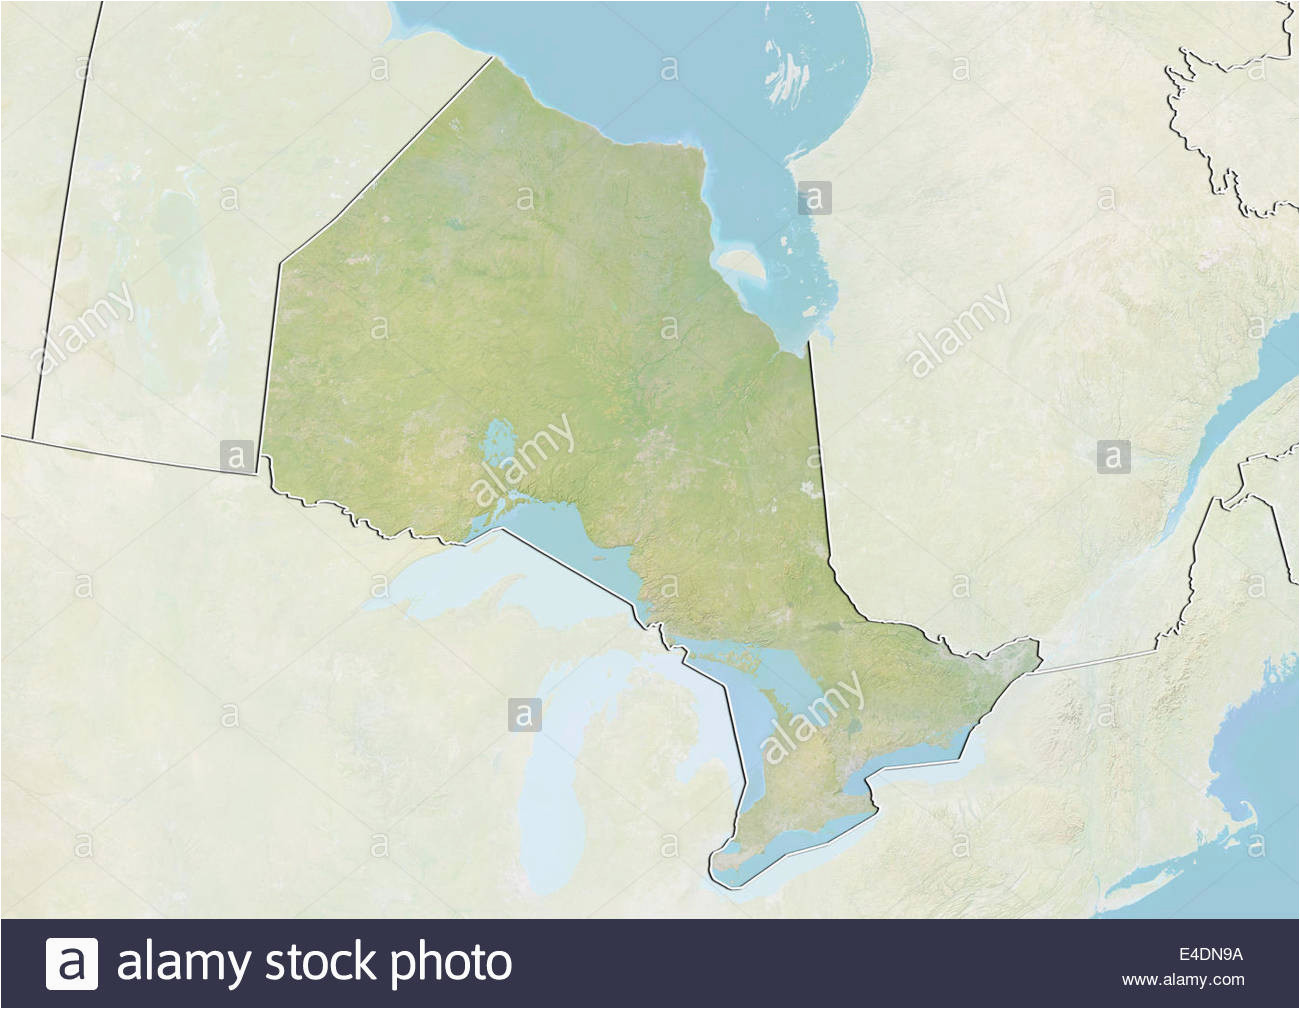 map of ontario stock photos map of ontario stock images